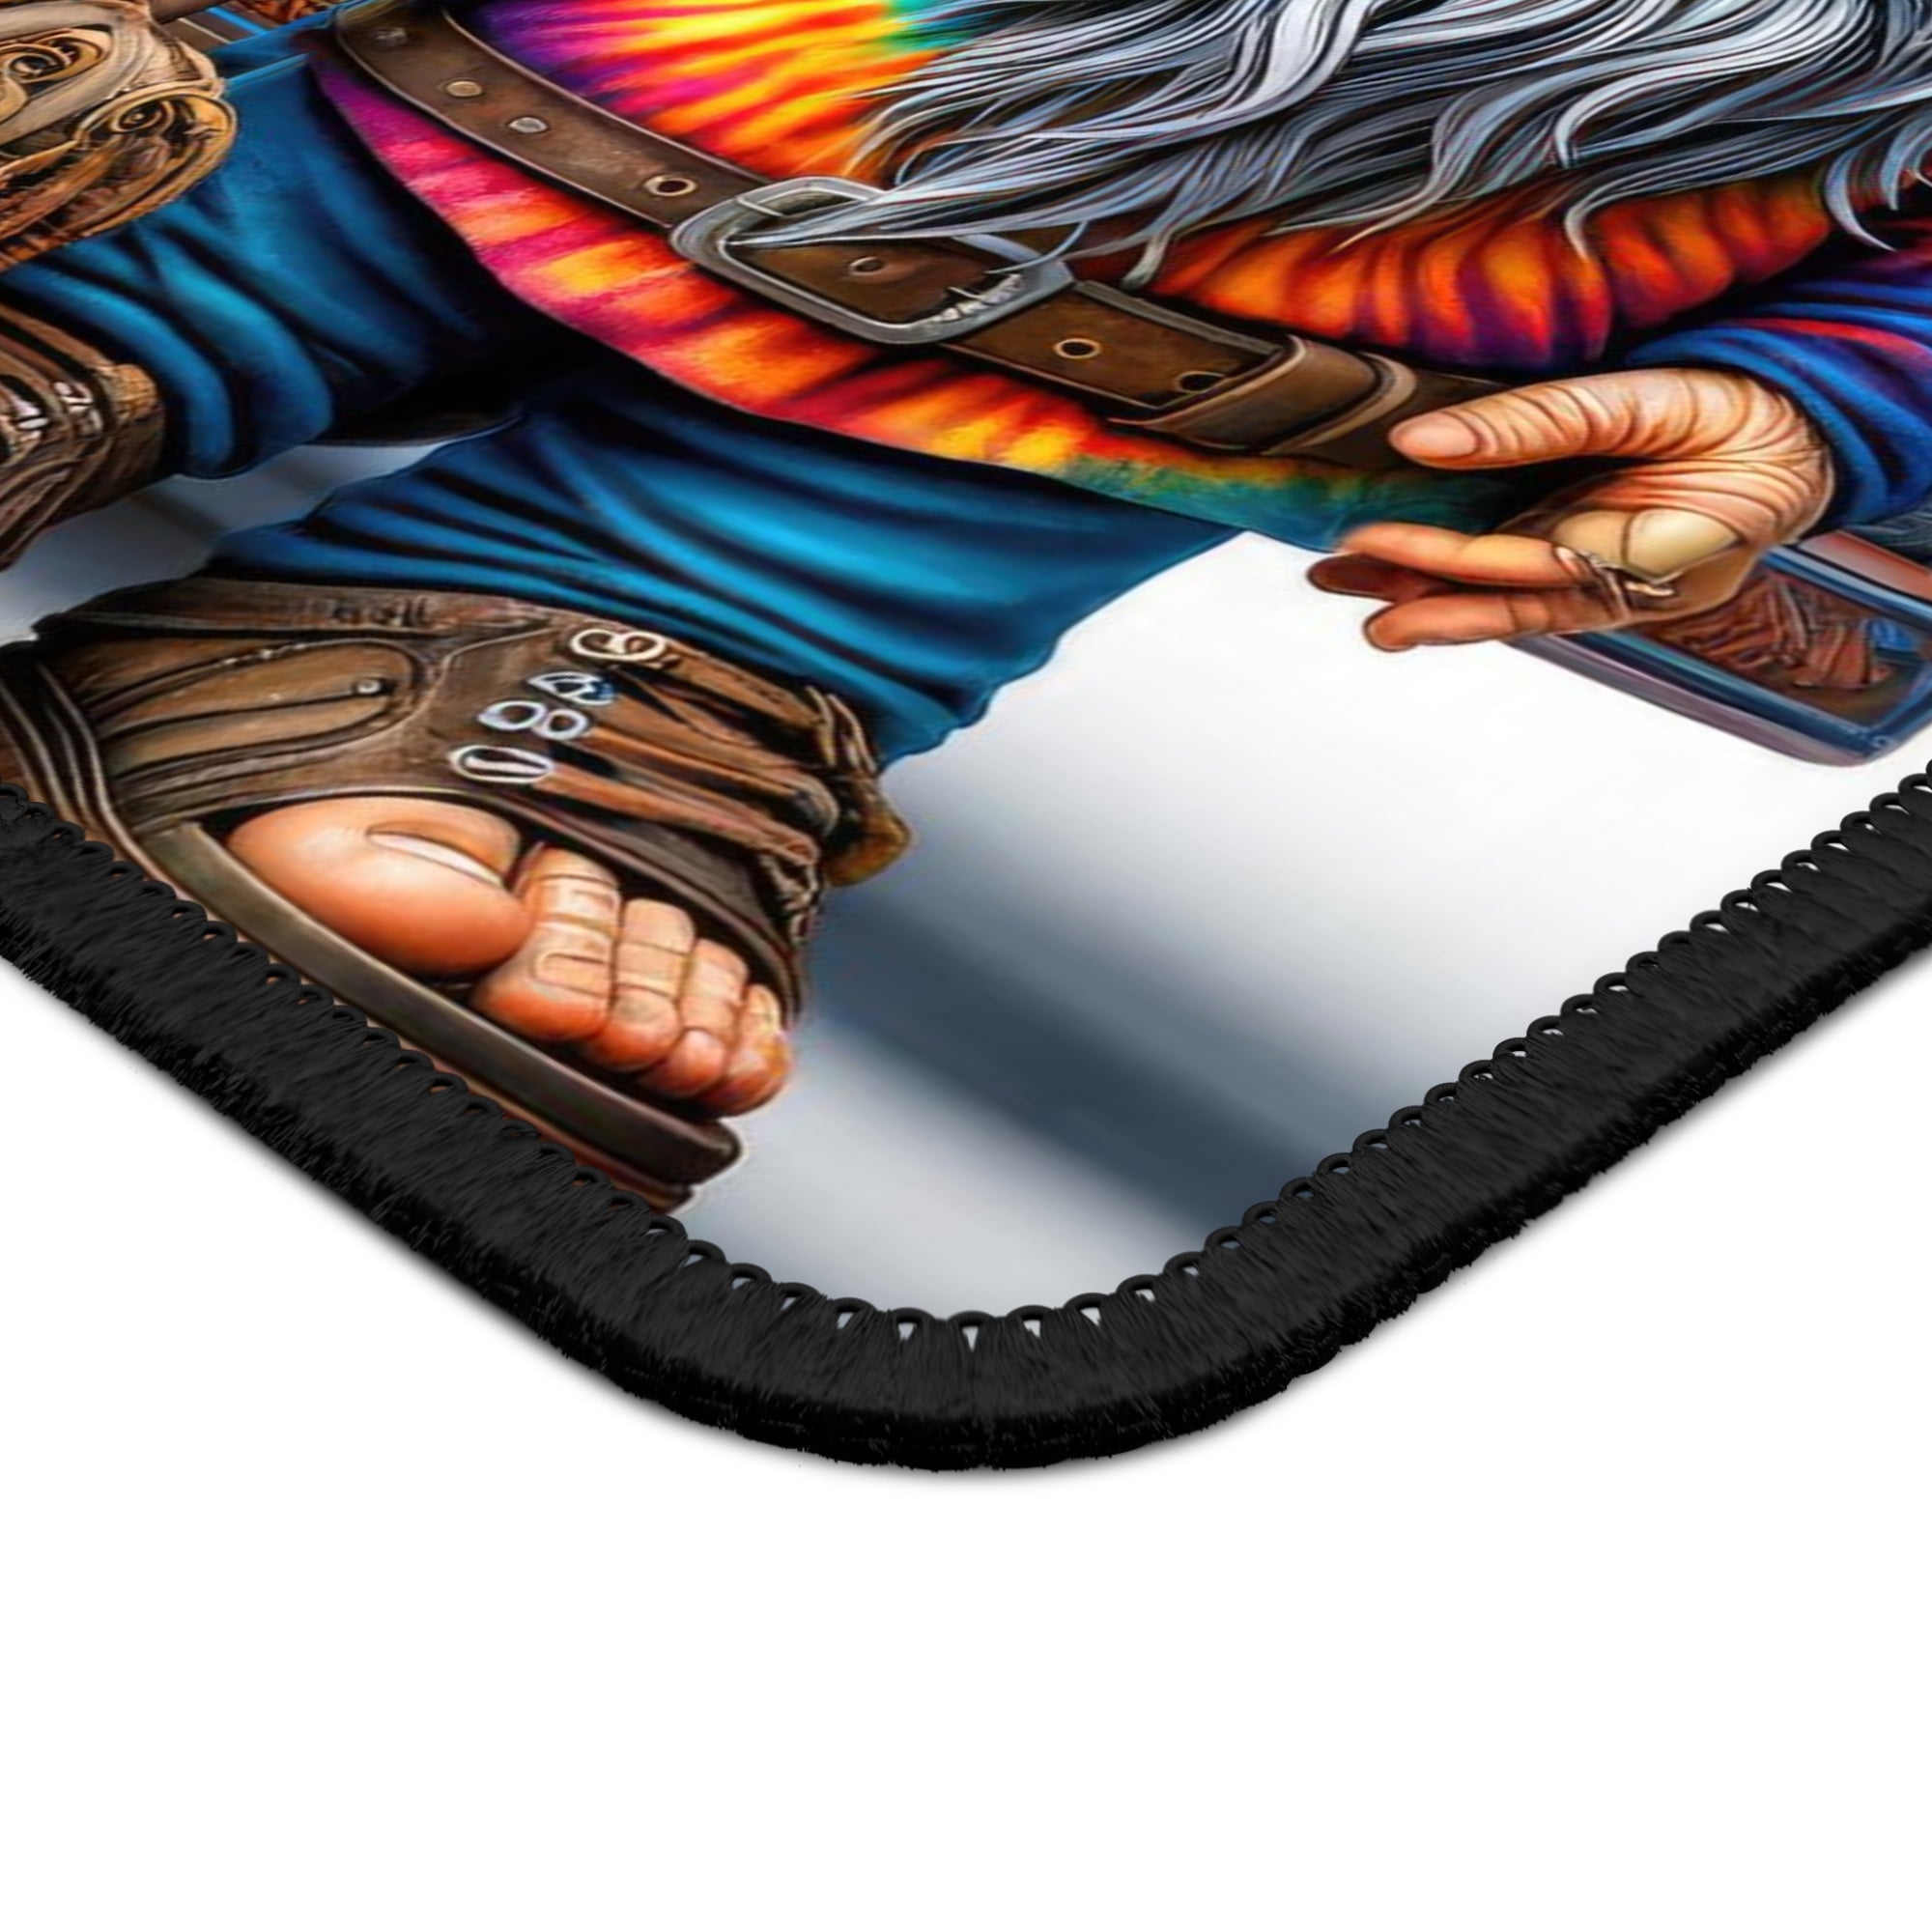 The Wandering Mystic of GrooveShire Gaming Mouse Pad